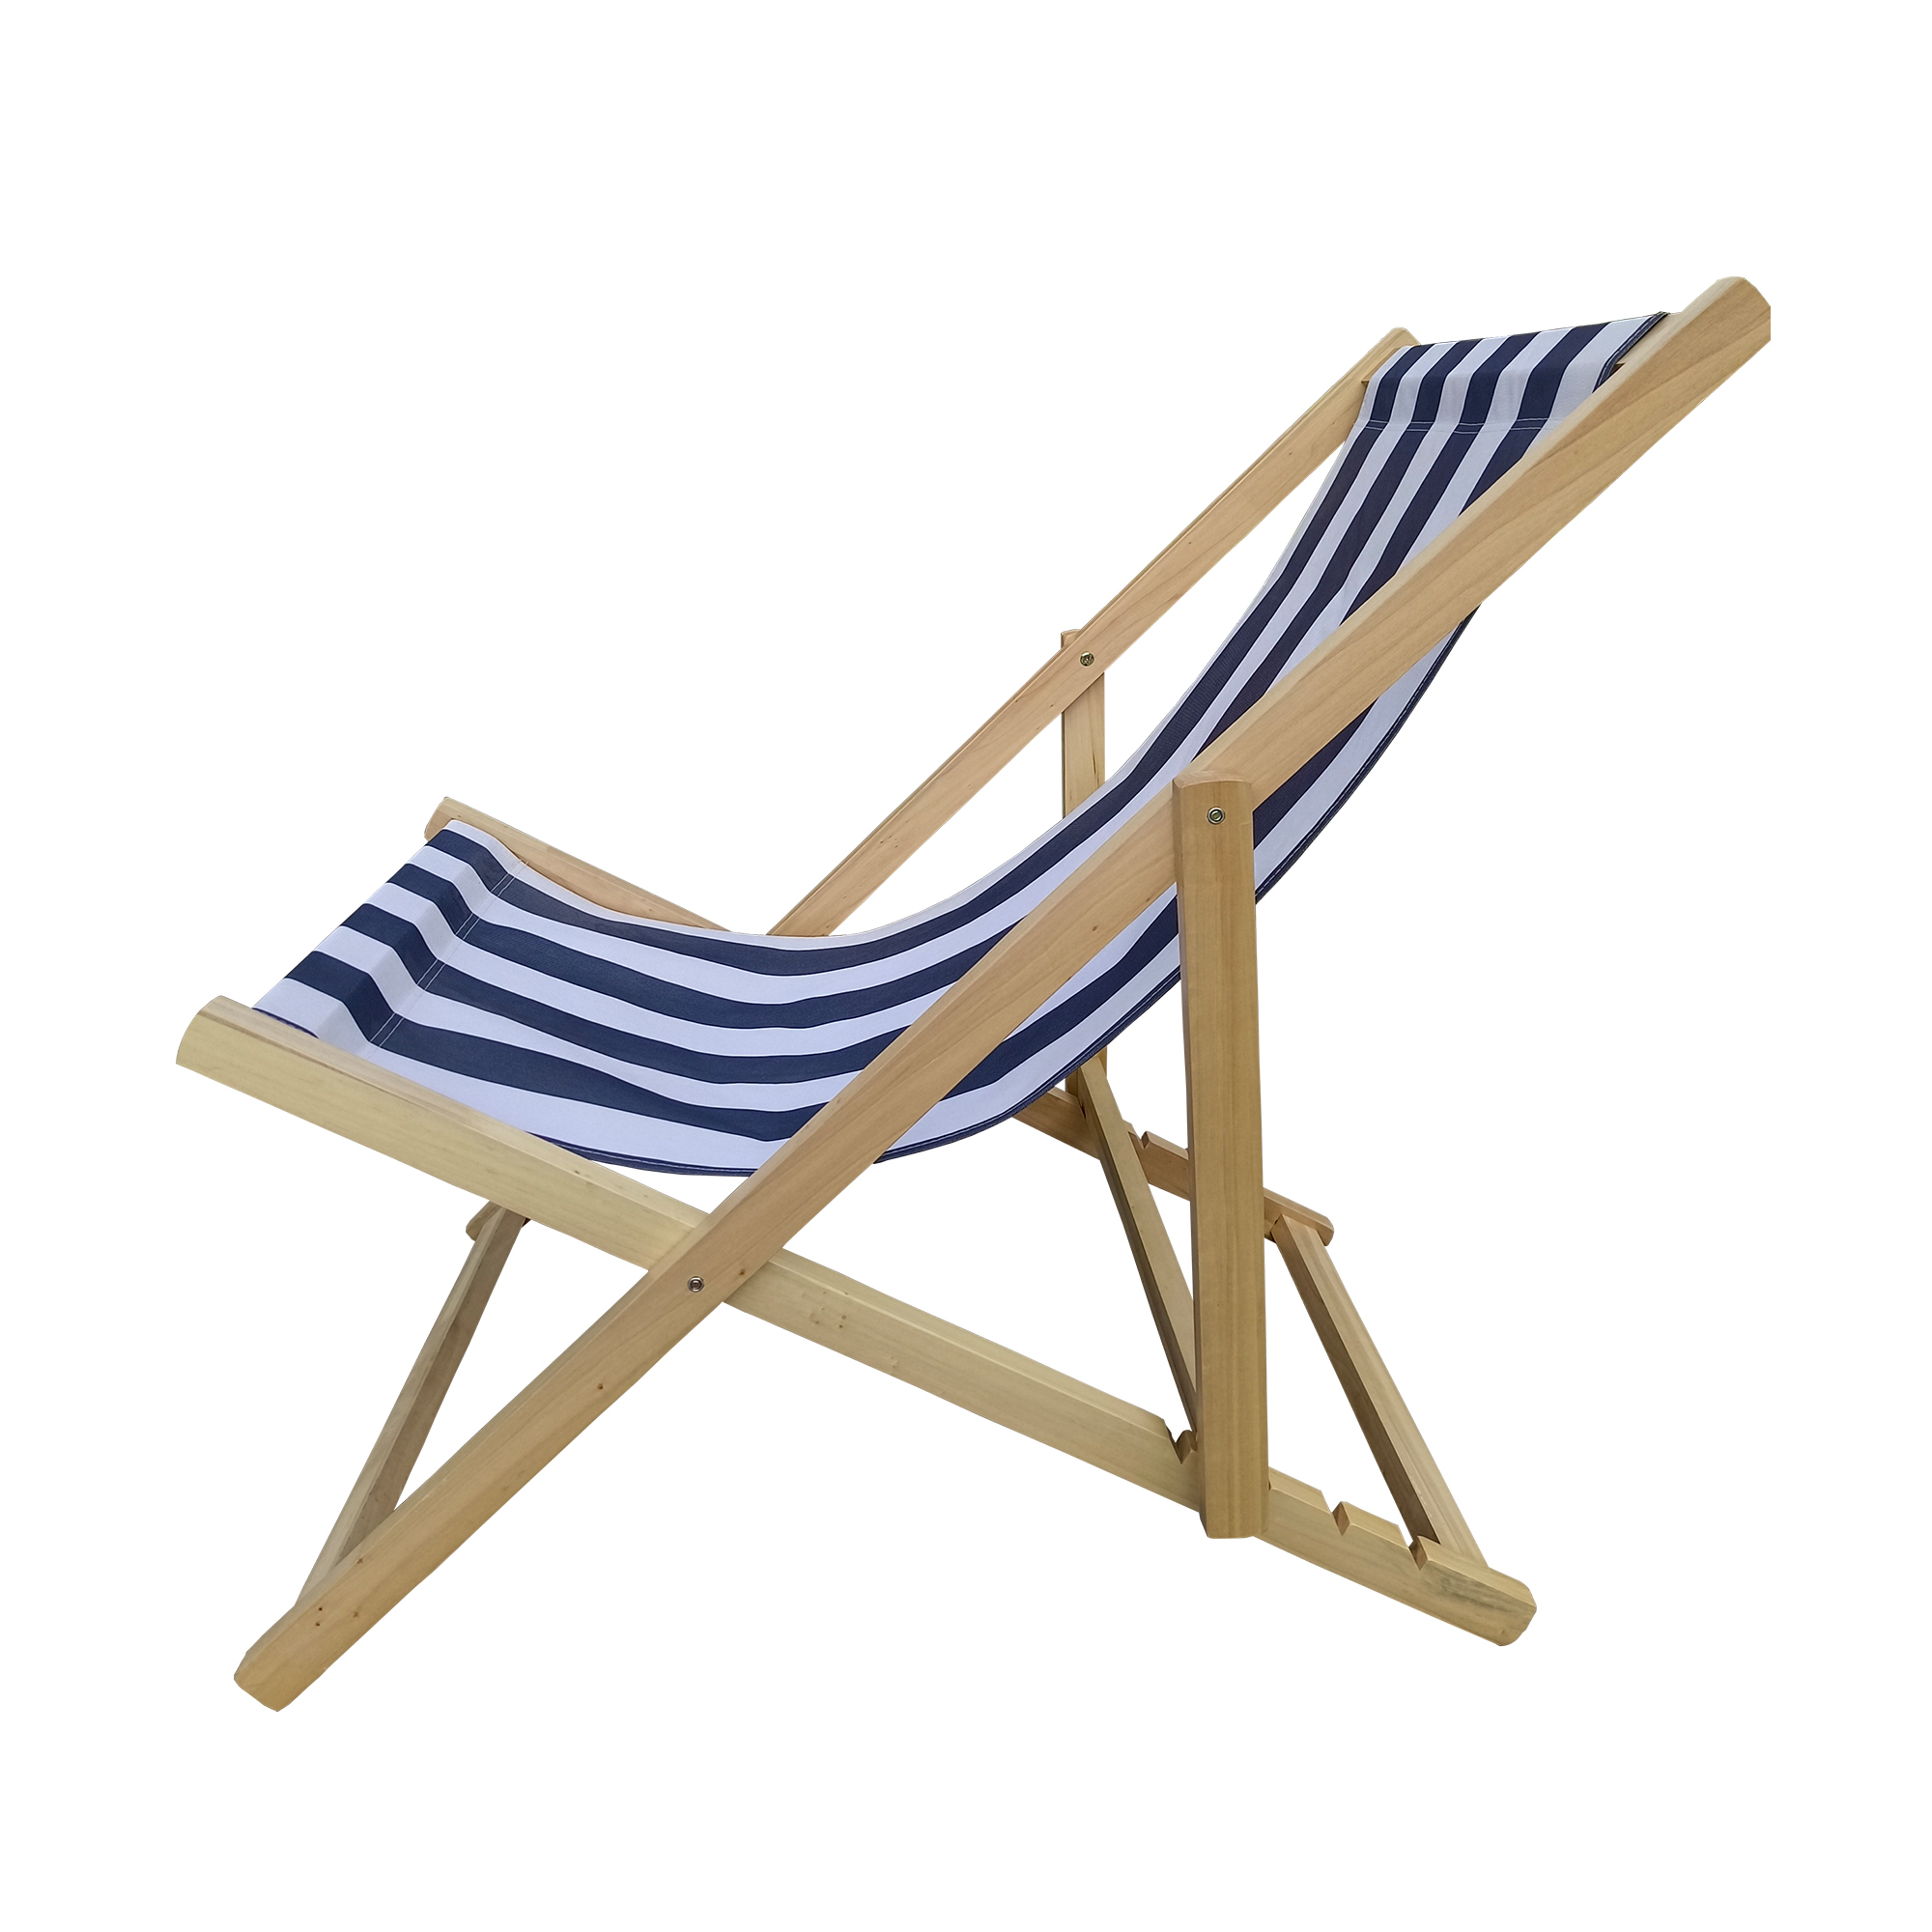 MONSTRUNO Stripe Chaise Lounge Chair - Garden Outdoor Folding Lounge Chairs Wood, Stacking Sling Chaise Lounge, Dark Blue - image 3 of 7